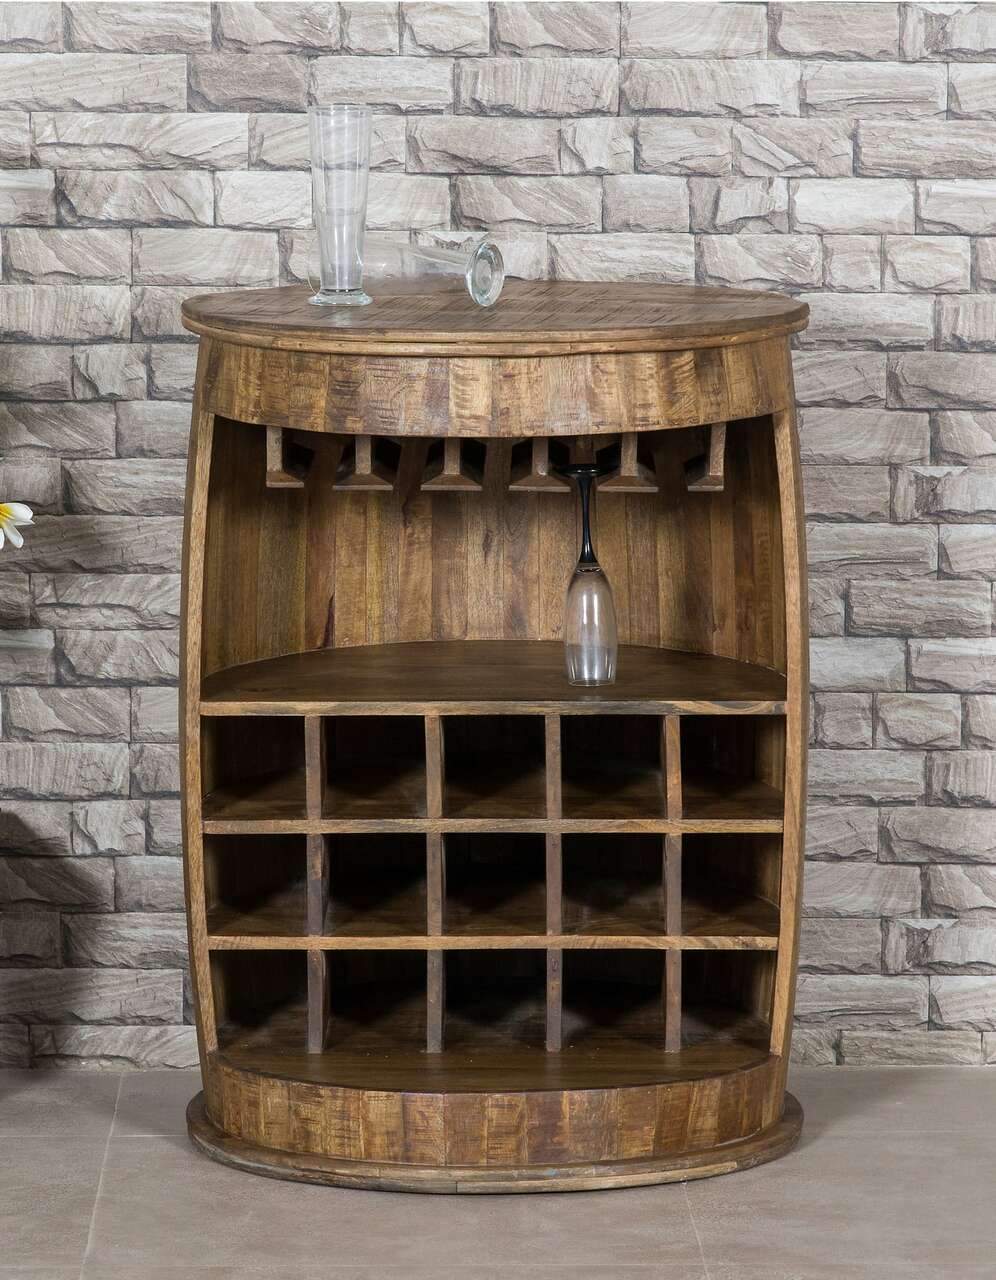 15211 Markers Round Bar Cabinet $595.99